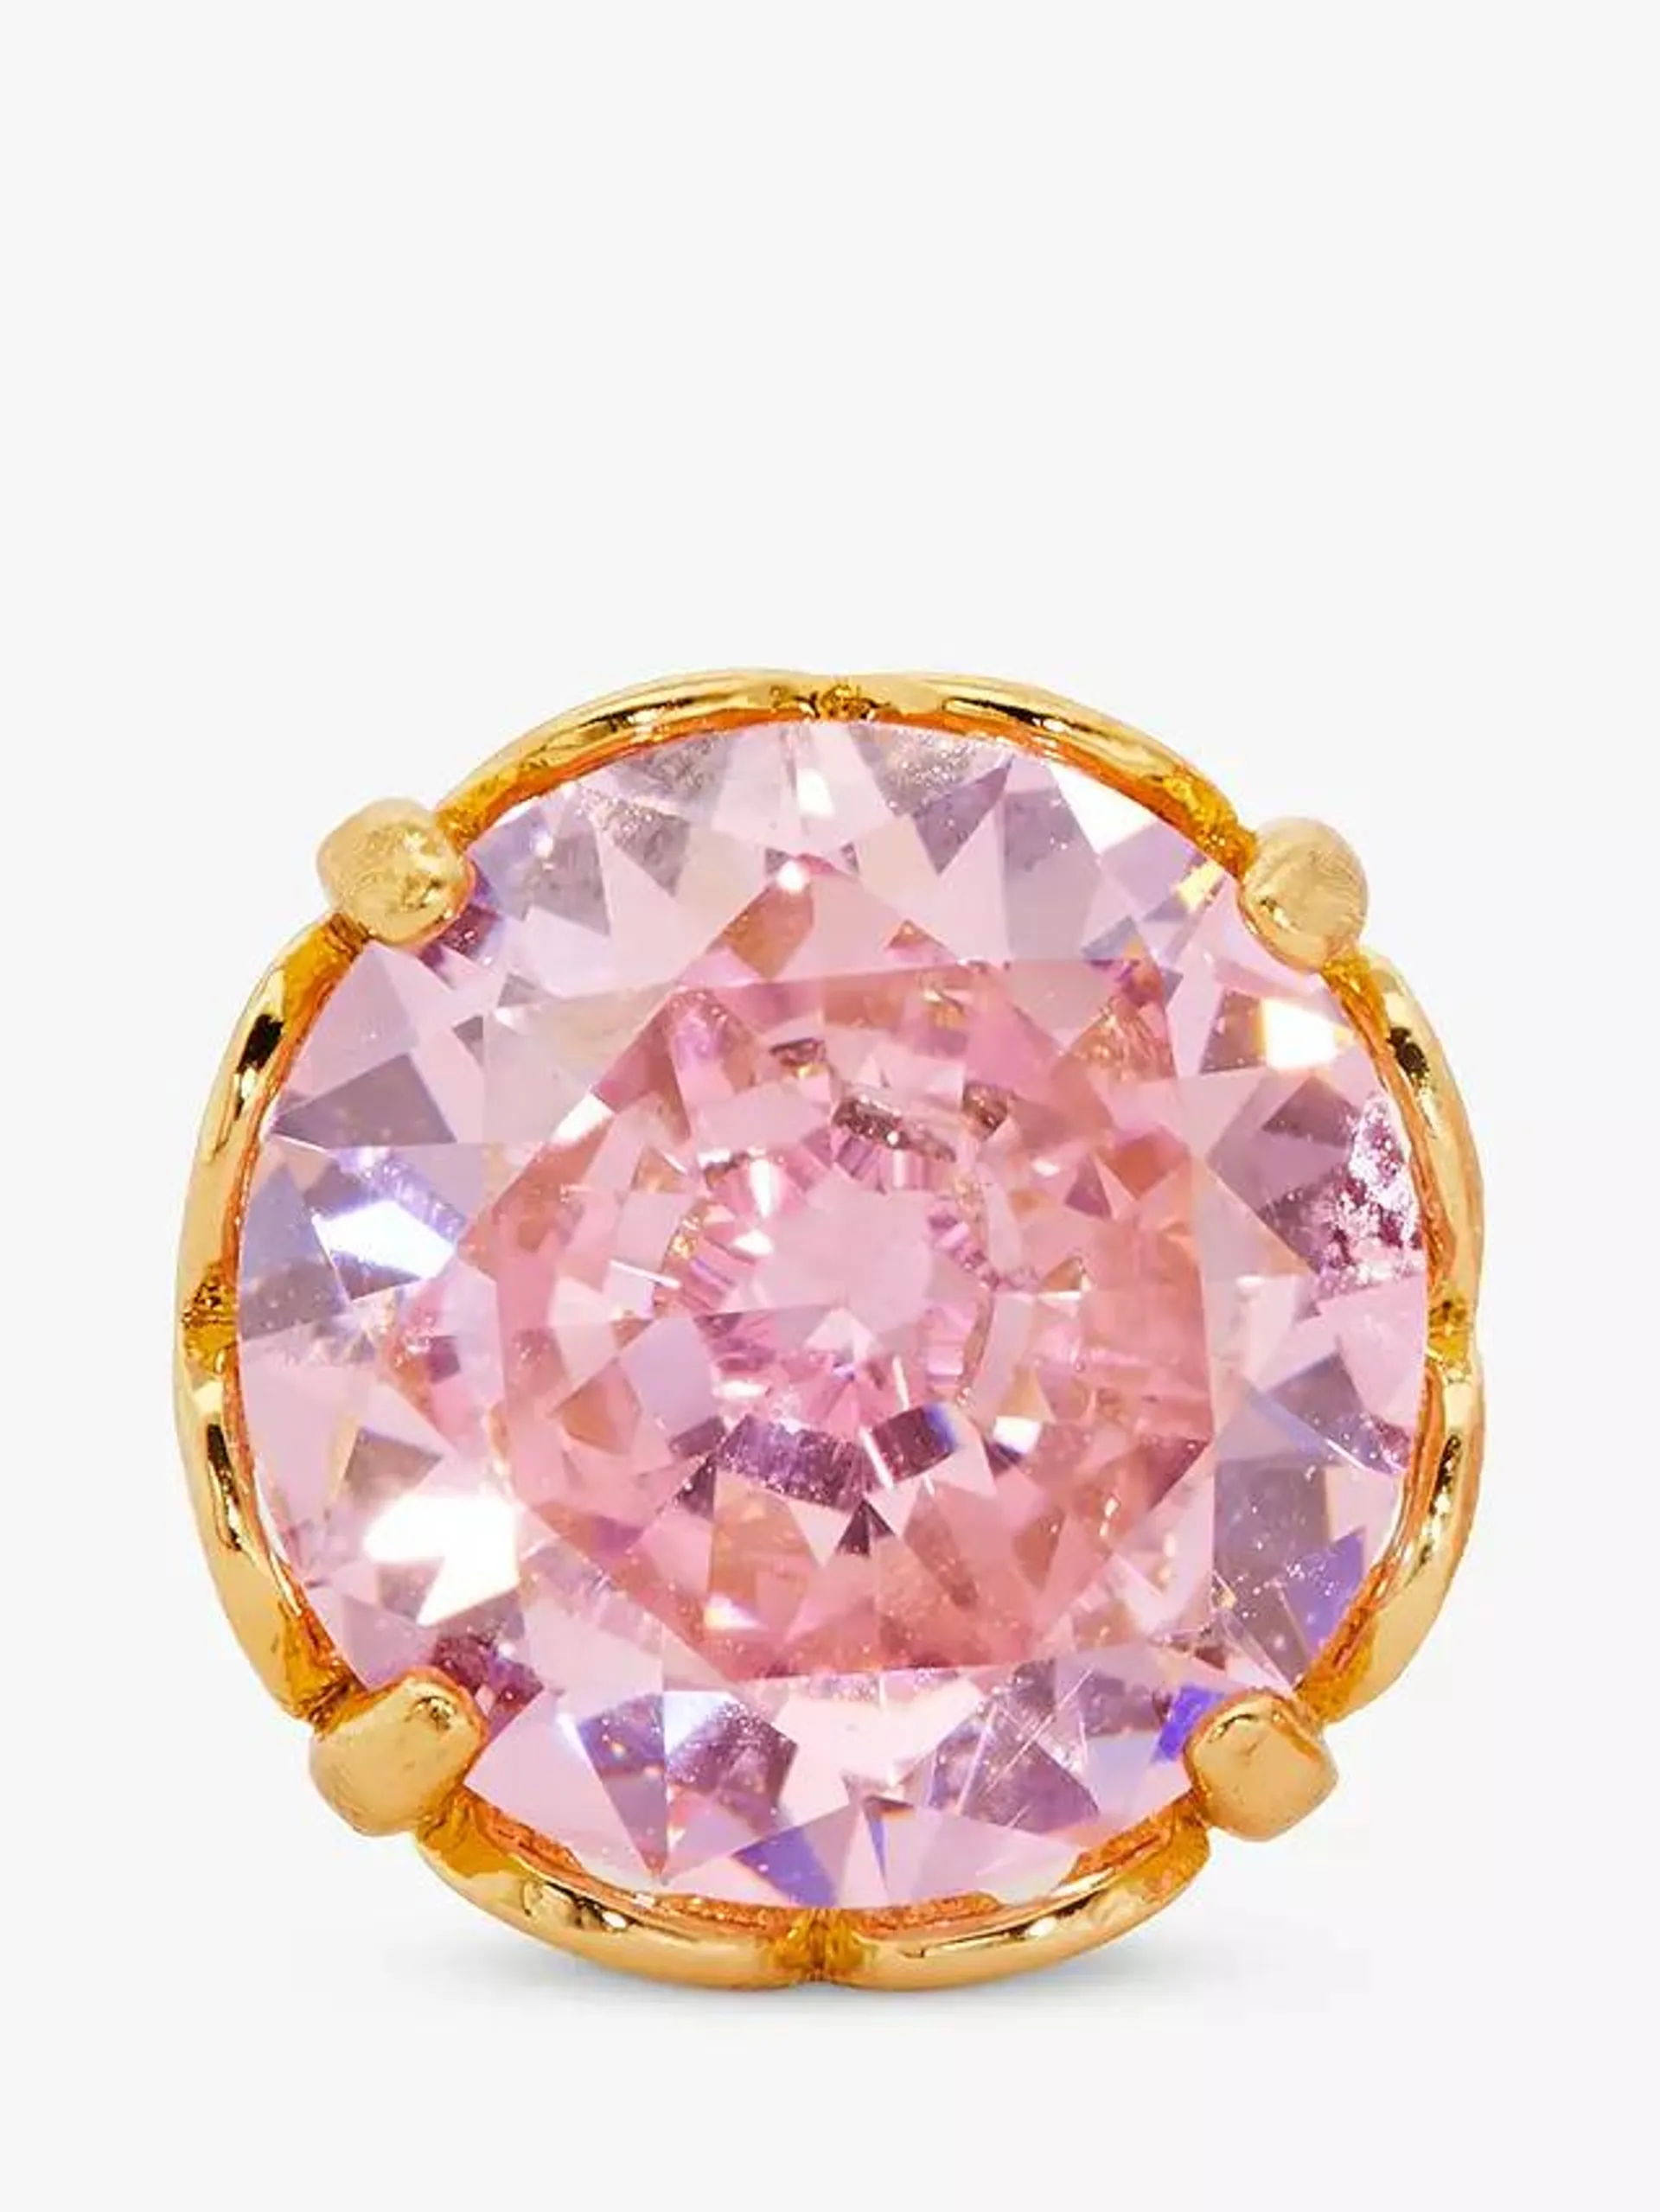 kate spade new york Cubic Zirconia Round Stud Earrings, Gold/Pink